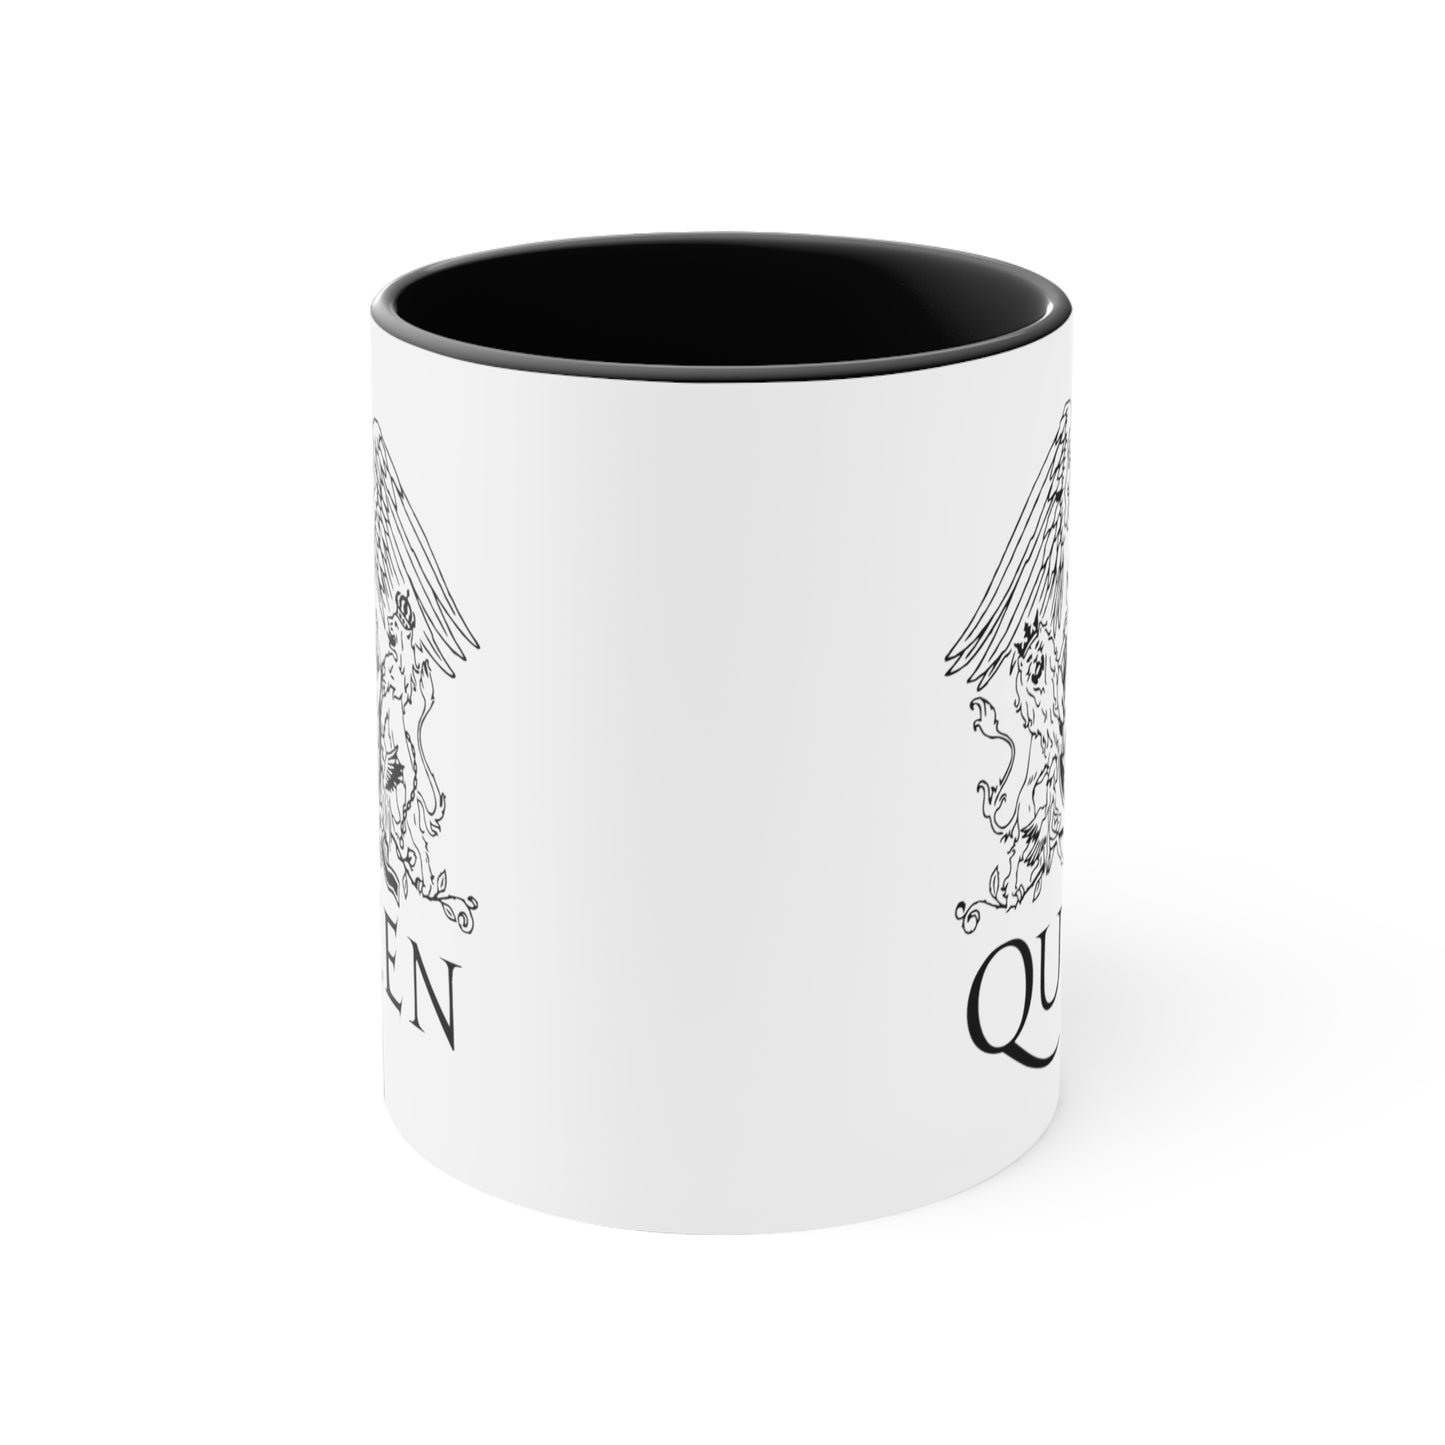 Queen Coffee Mug - Double Sided Black Accent White Ceramic  11oz by TheGlassyLass